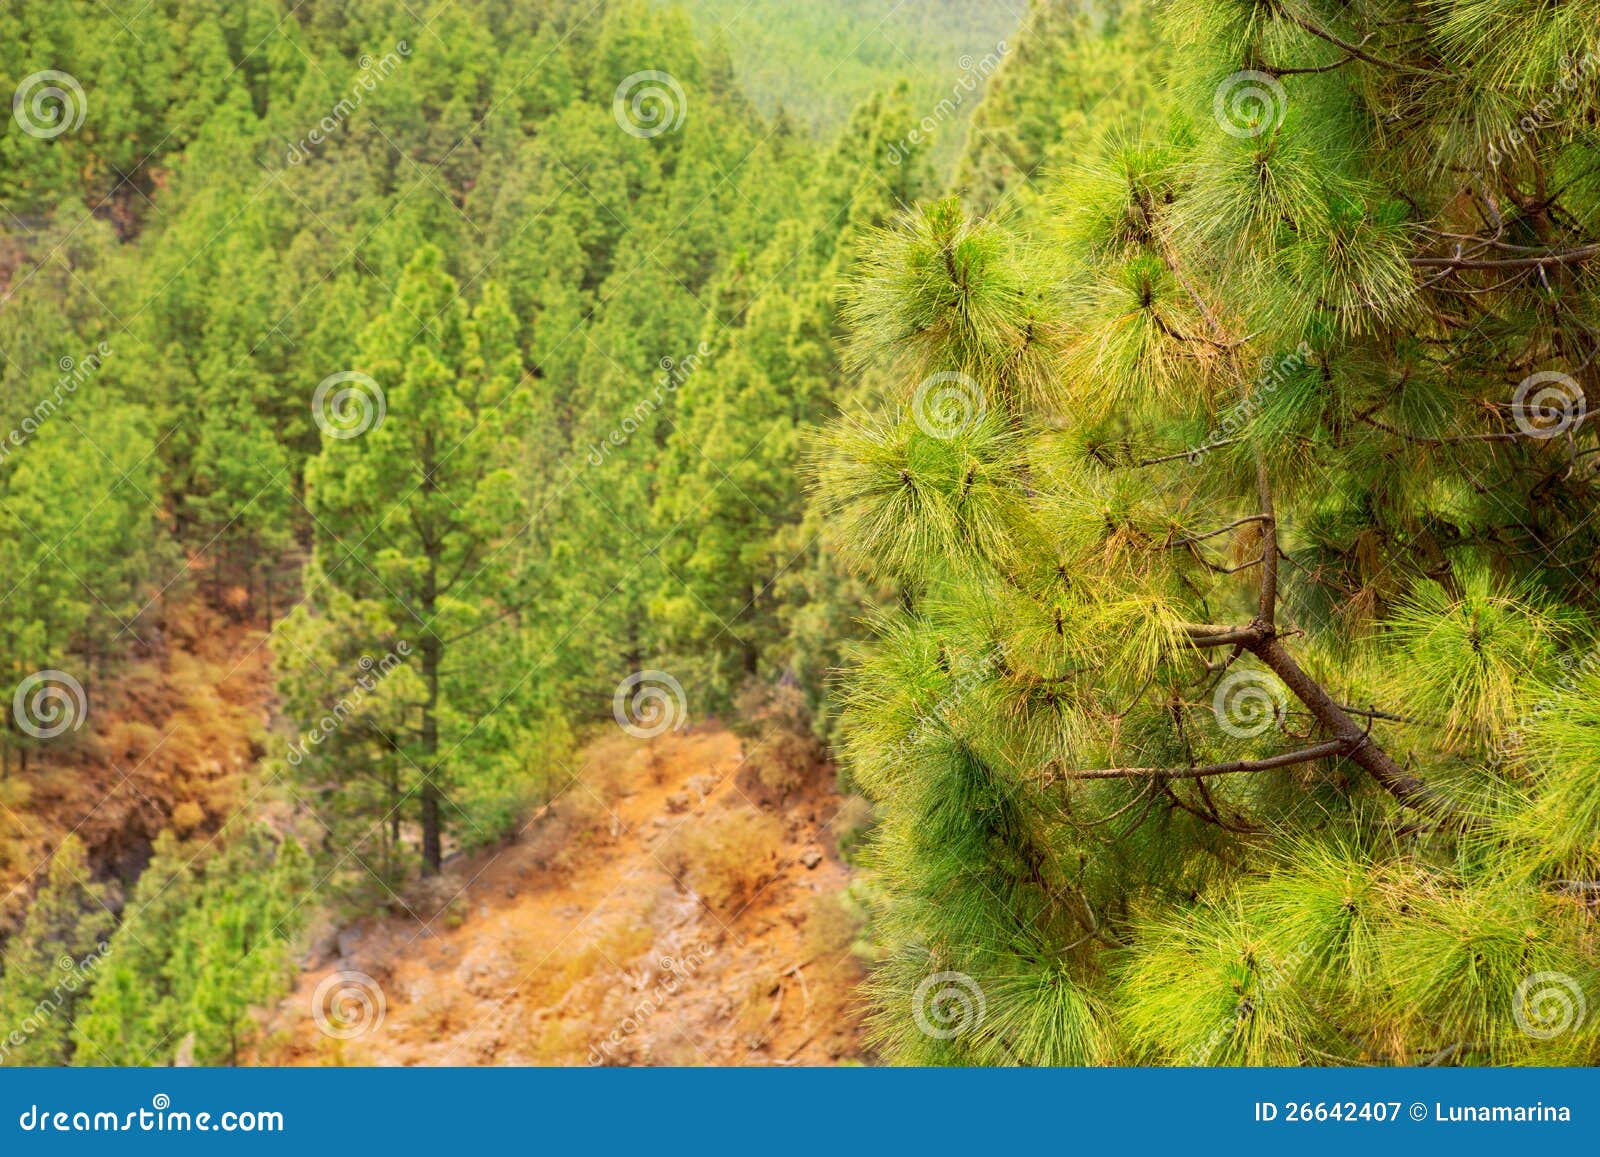 corona forestal in teide national park at tenerife